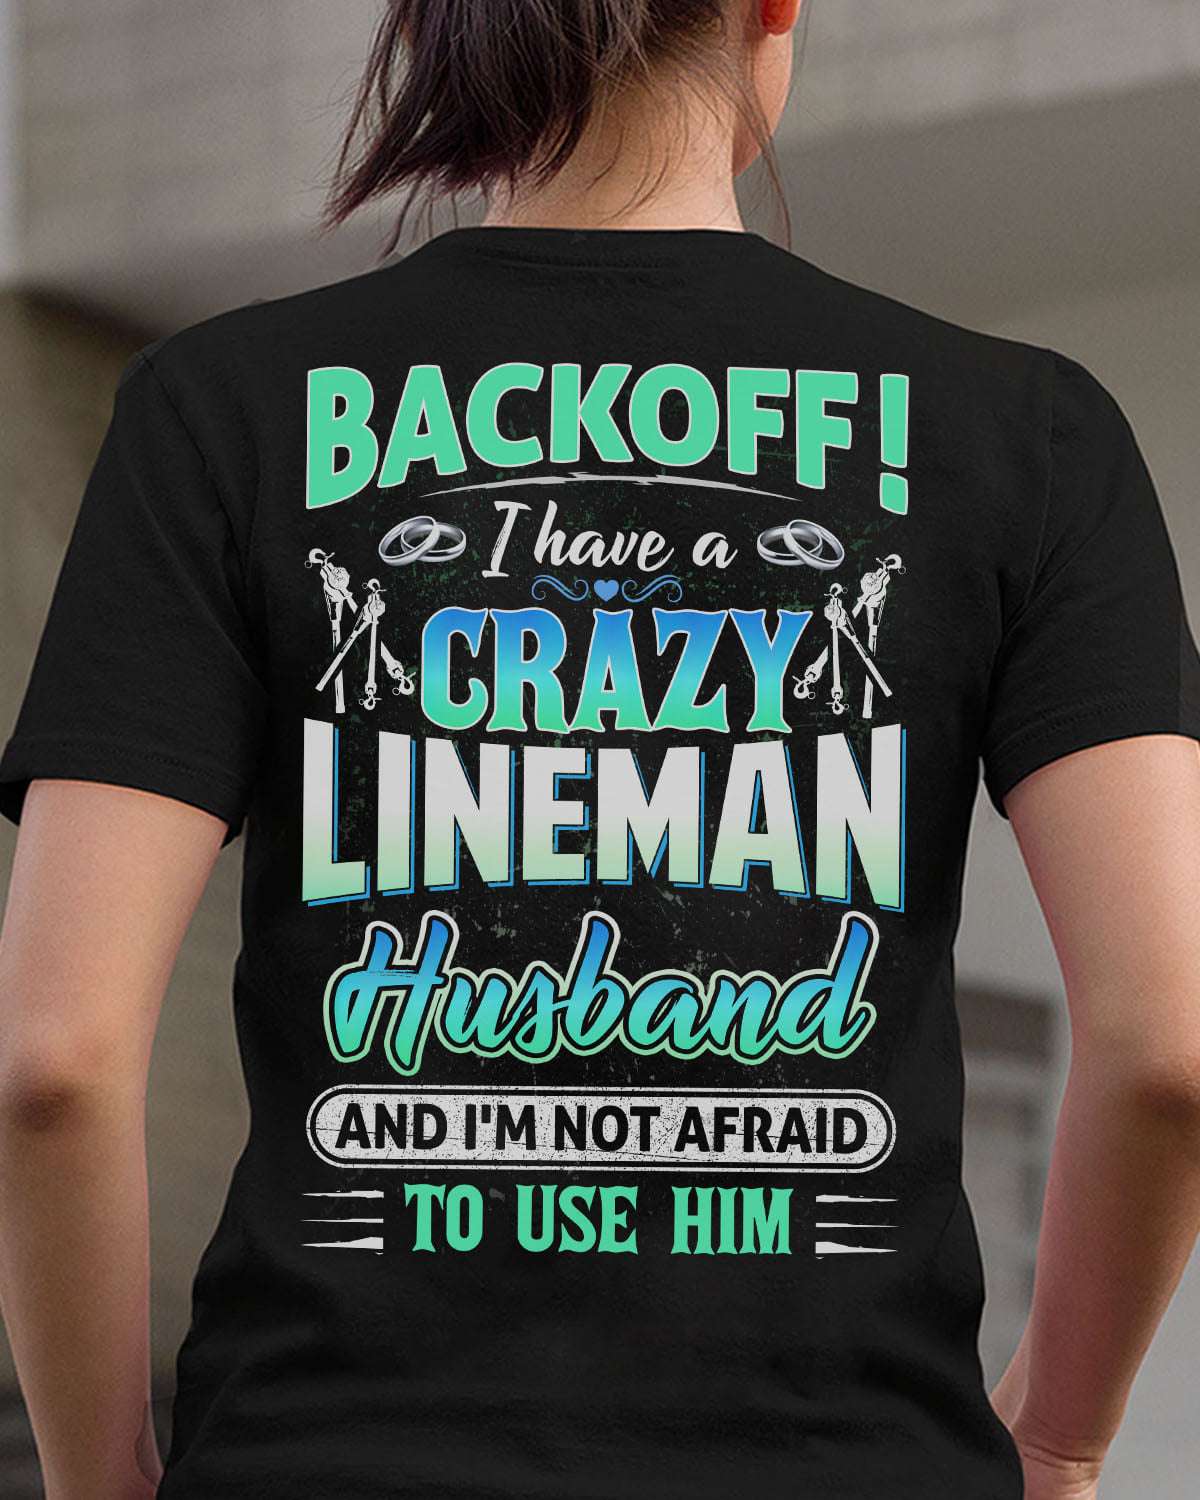 Backoff i have a crazy lineman husband and i'm not afraid to use him